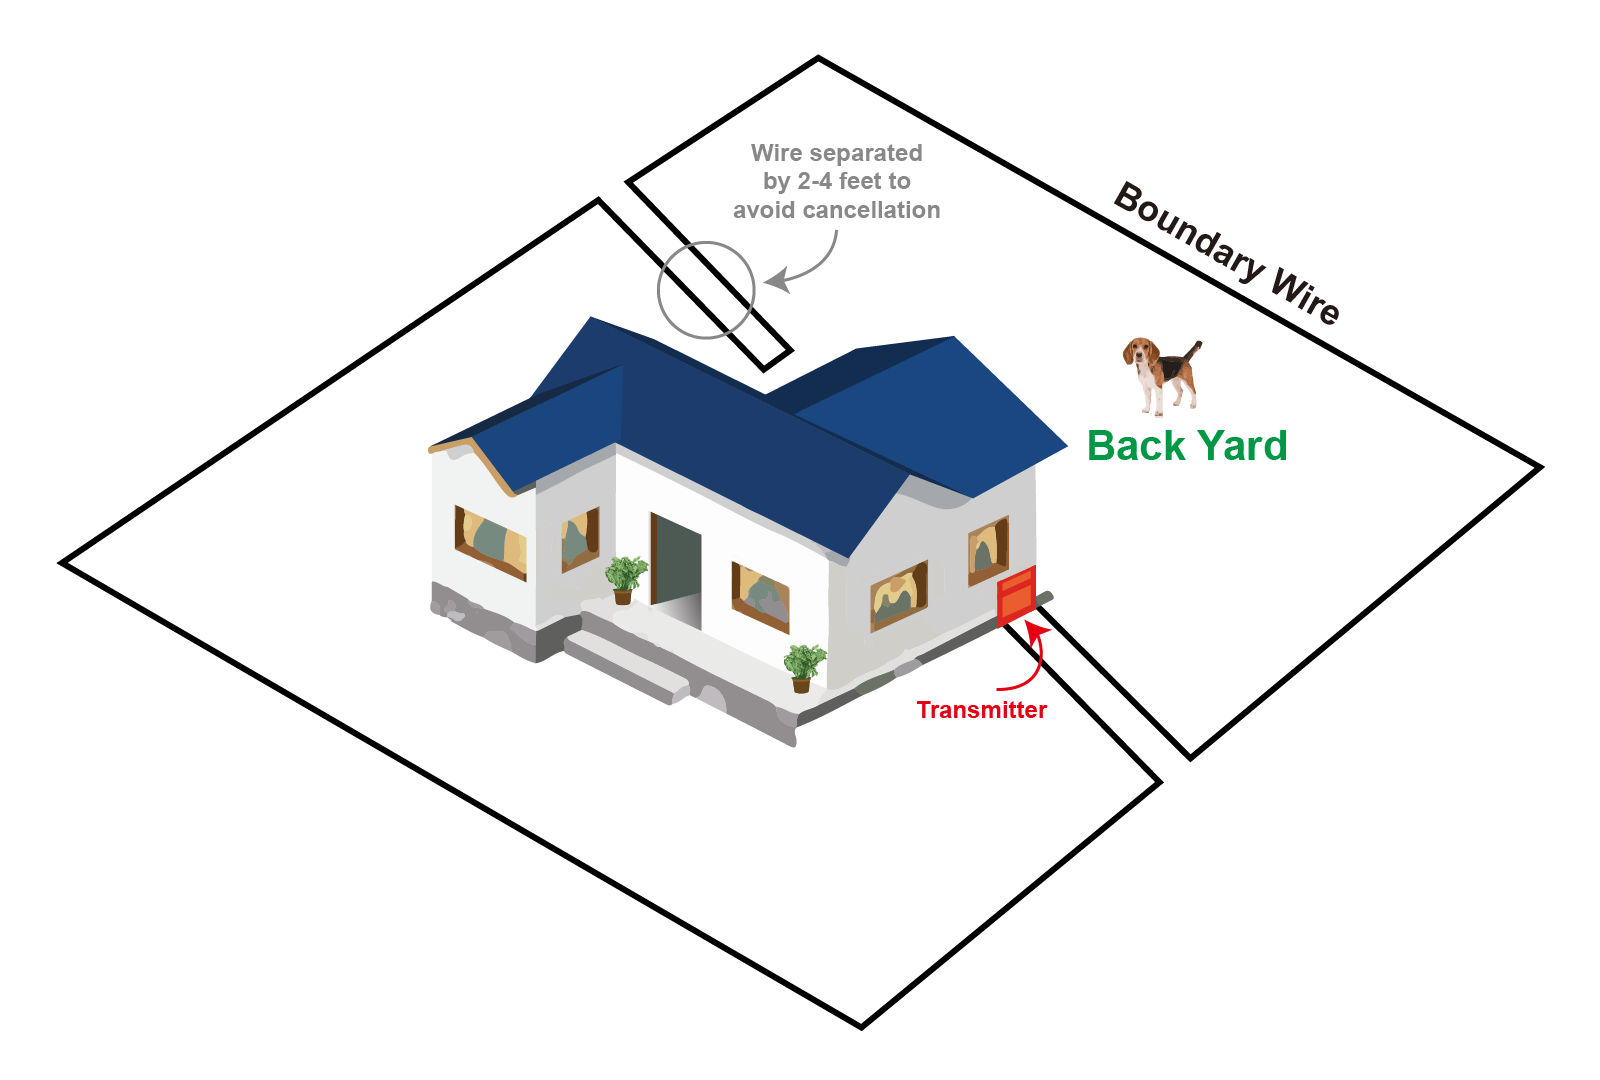 Graphic with a house, dog and boundary wire